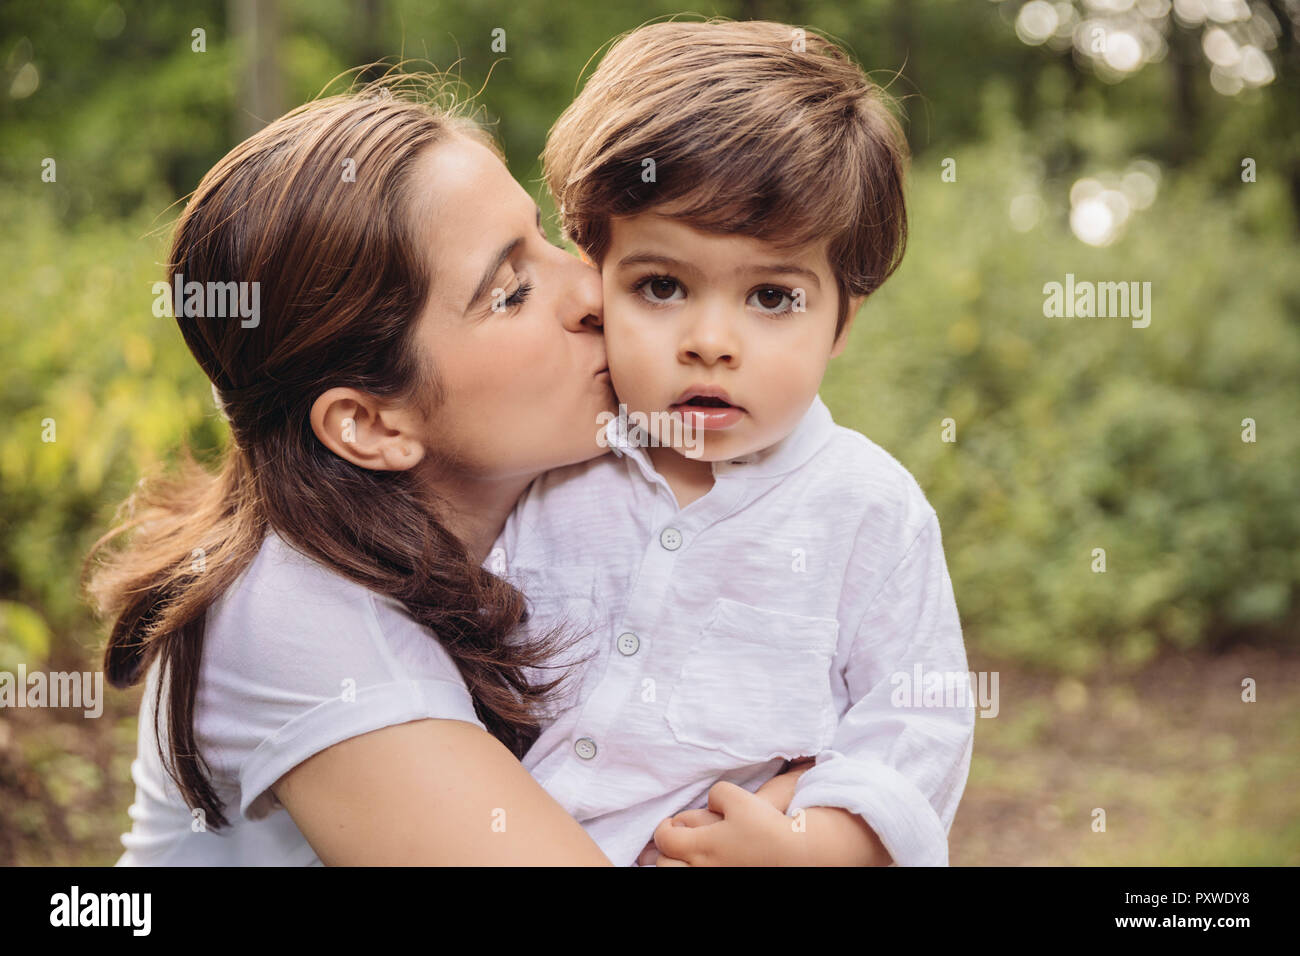 Mother kissing toddler on cheek in park Stock Photo